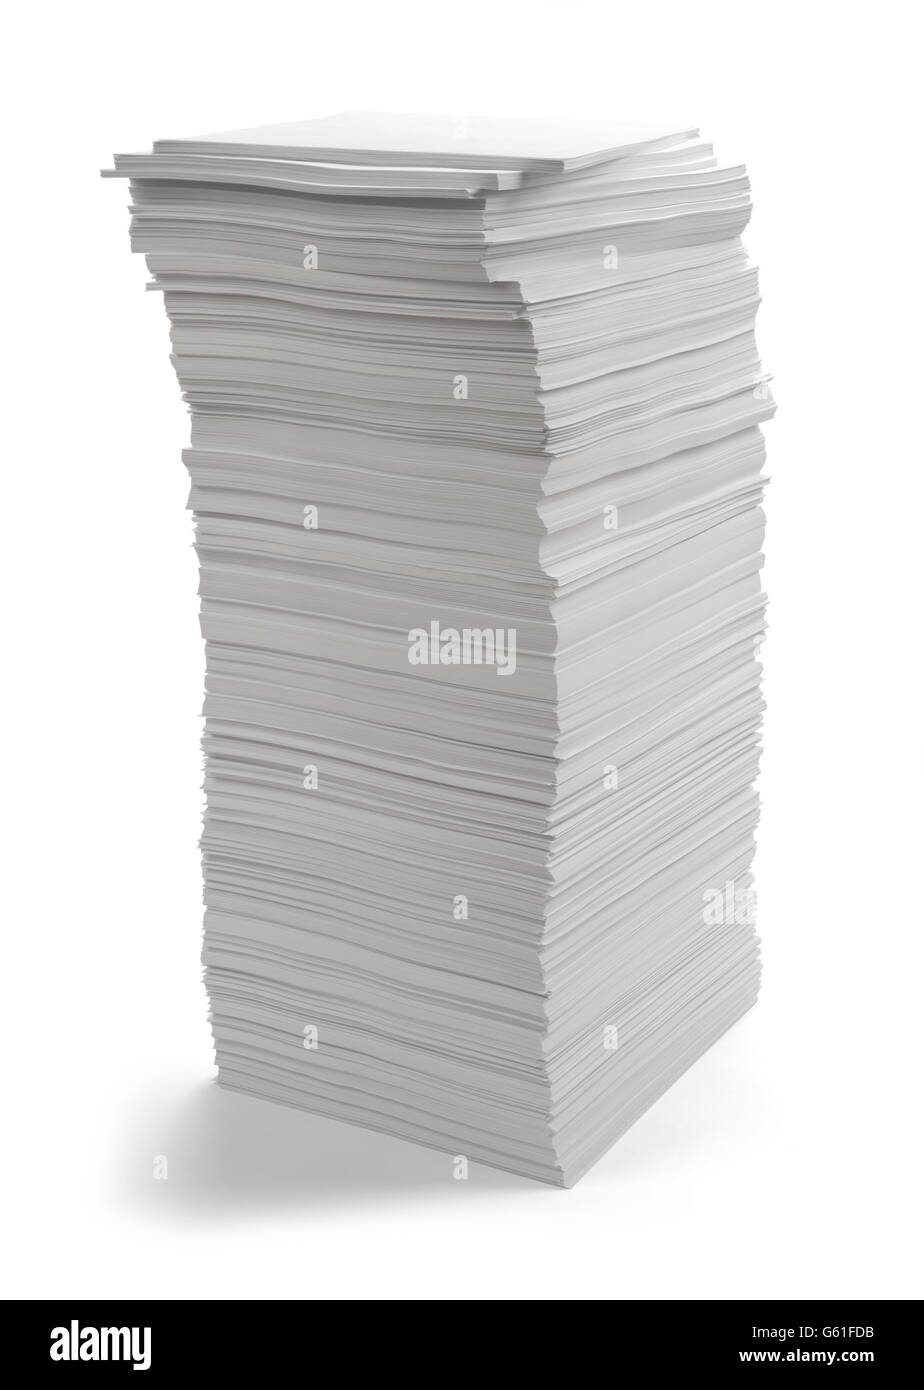 Large Pile of Copy Paper Isolated on White Background. Stock Photo